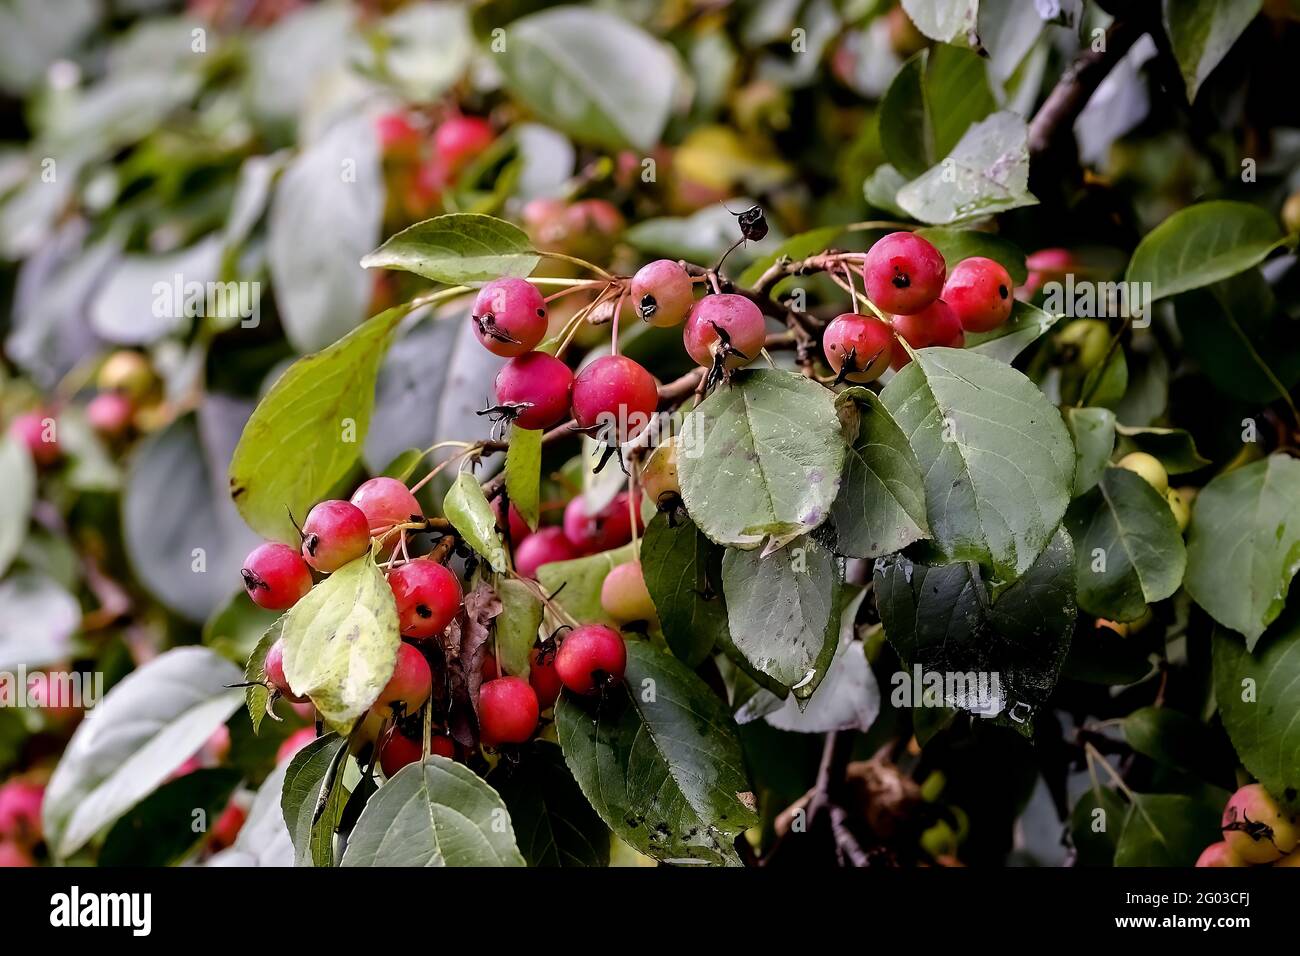 Red fruits of a grabapple named 'John Downie' (Malus pumila) ripe on the branches after a rain in summer, Bavaria, Germany Stock Photo